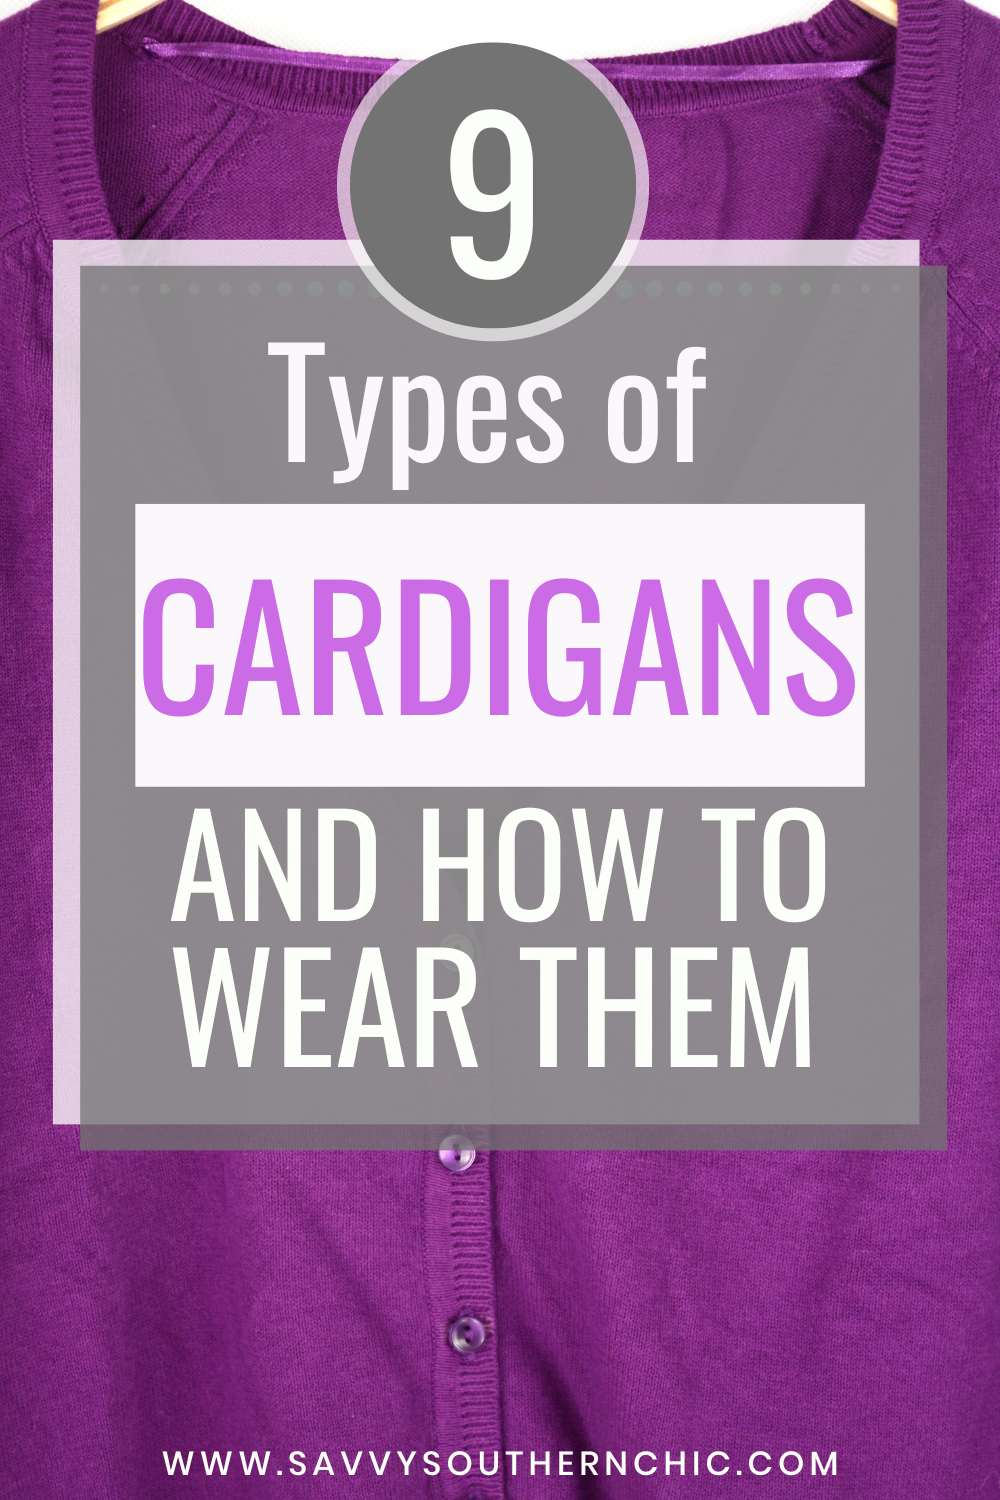 9 TYPES OF CARDIGANS AND HOW TO WEAR THEM